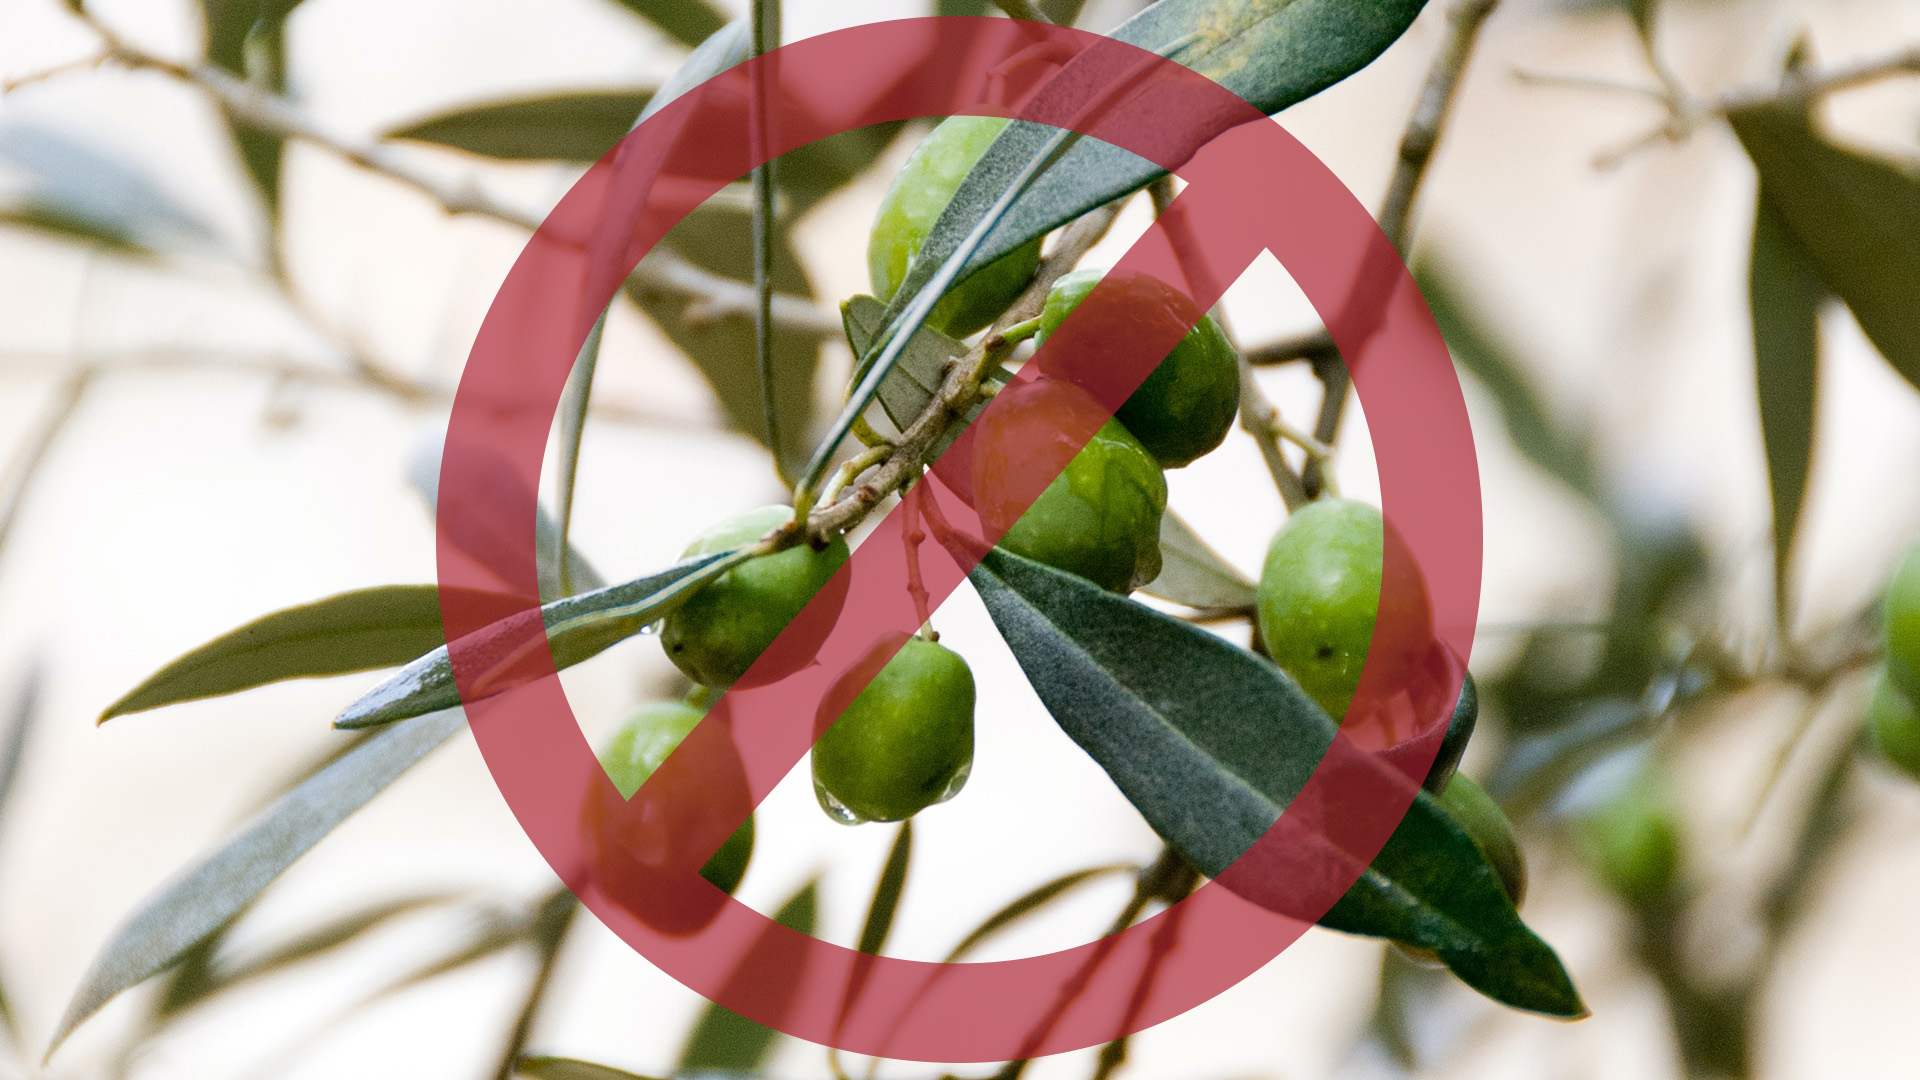 Olives on a tree with a red "no" symbol over it.